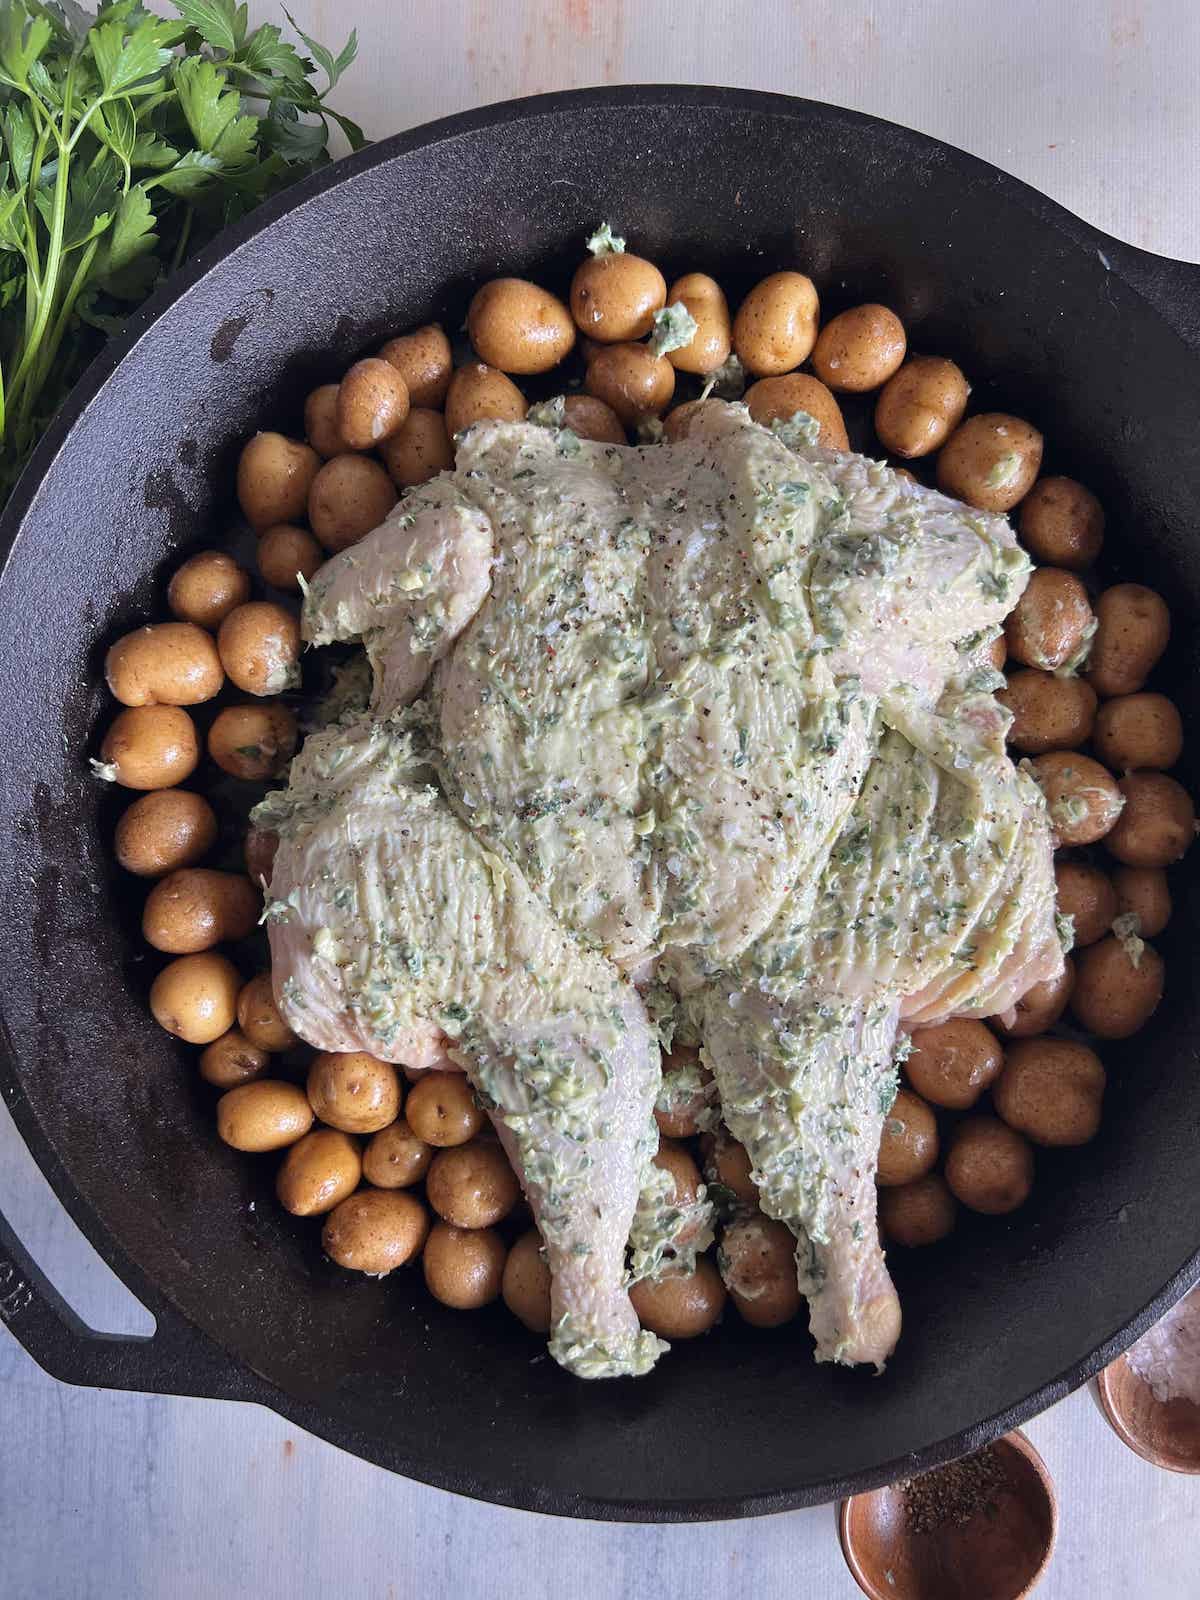 Whole raw spatchcock chicken covered in garlic herb butter in a cast iron pan surrounded by baby potatoes.